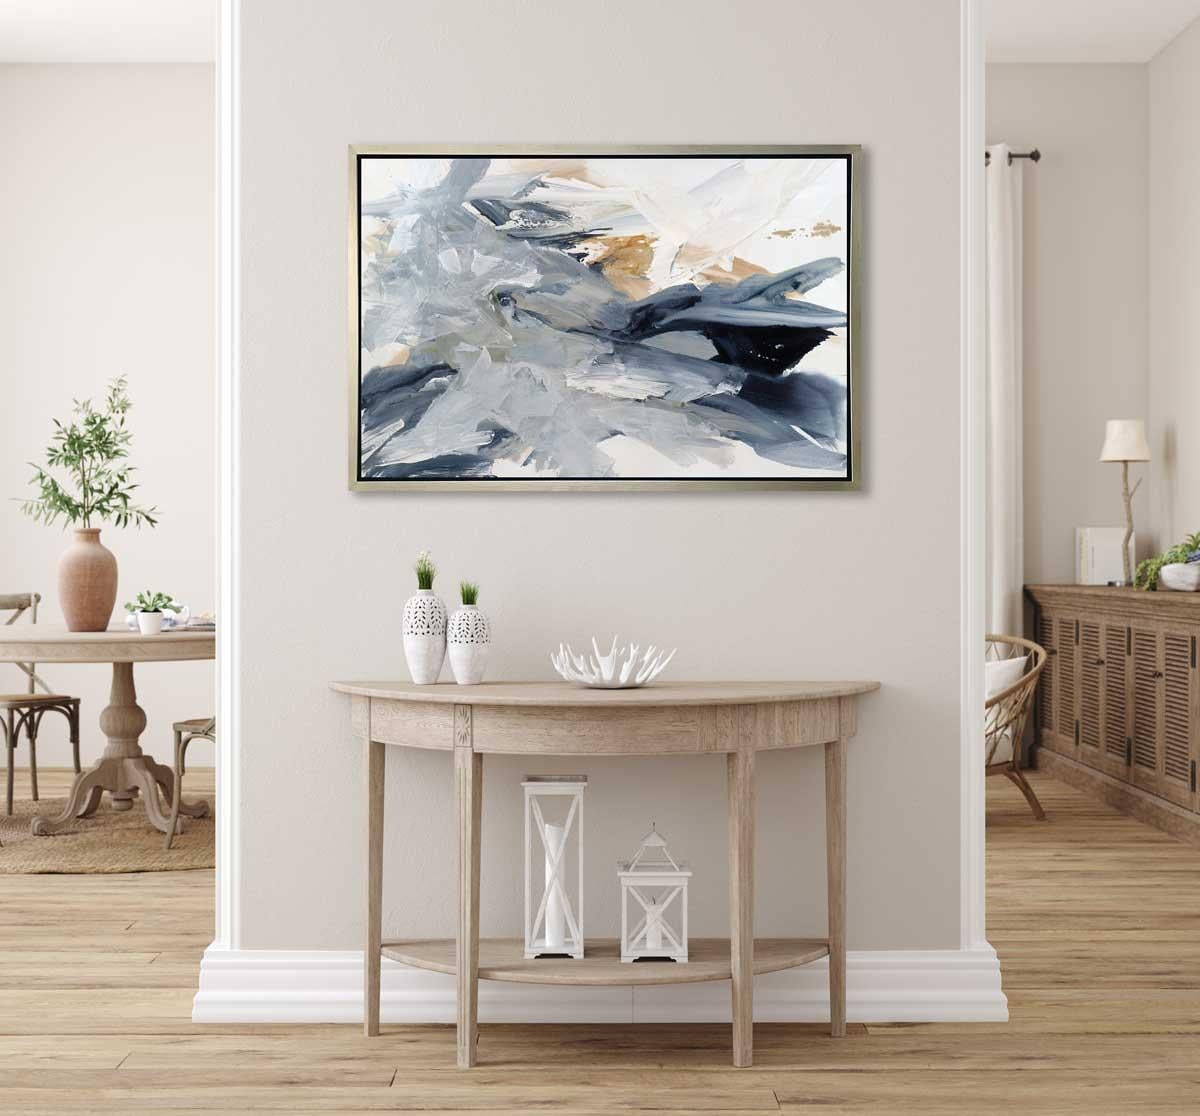 This abstract contemporary limited edition print by Teodora Guererra features broad, expressive strokes in grey, warm sepia tones, and white.

This Limited Edition giclee print by Teodora Guererra is an edition size of 195. Printed on canvas, this